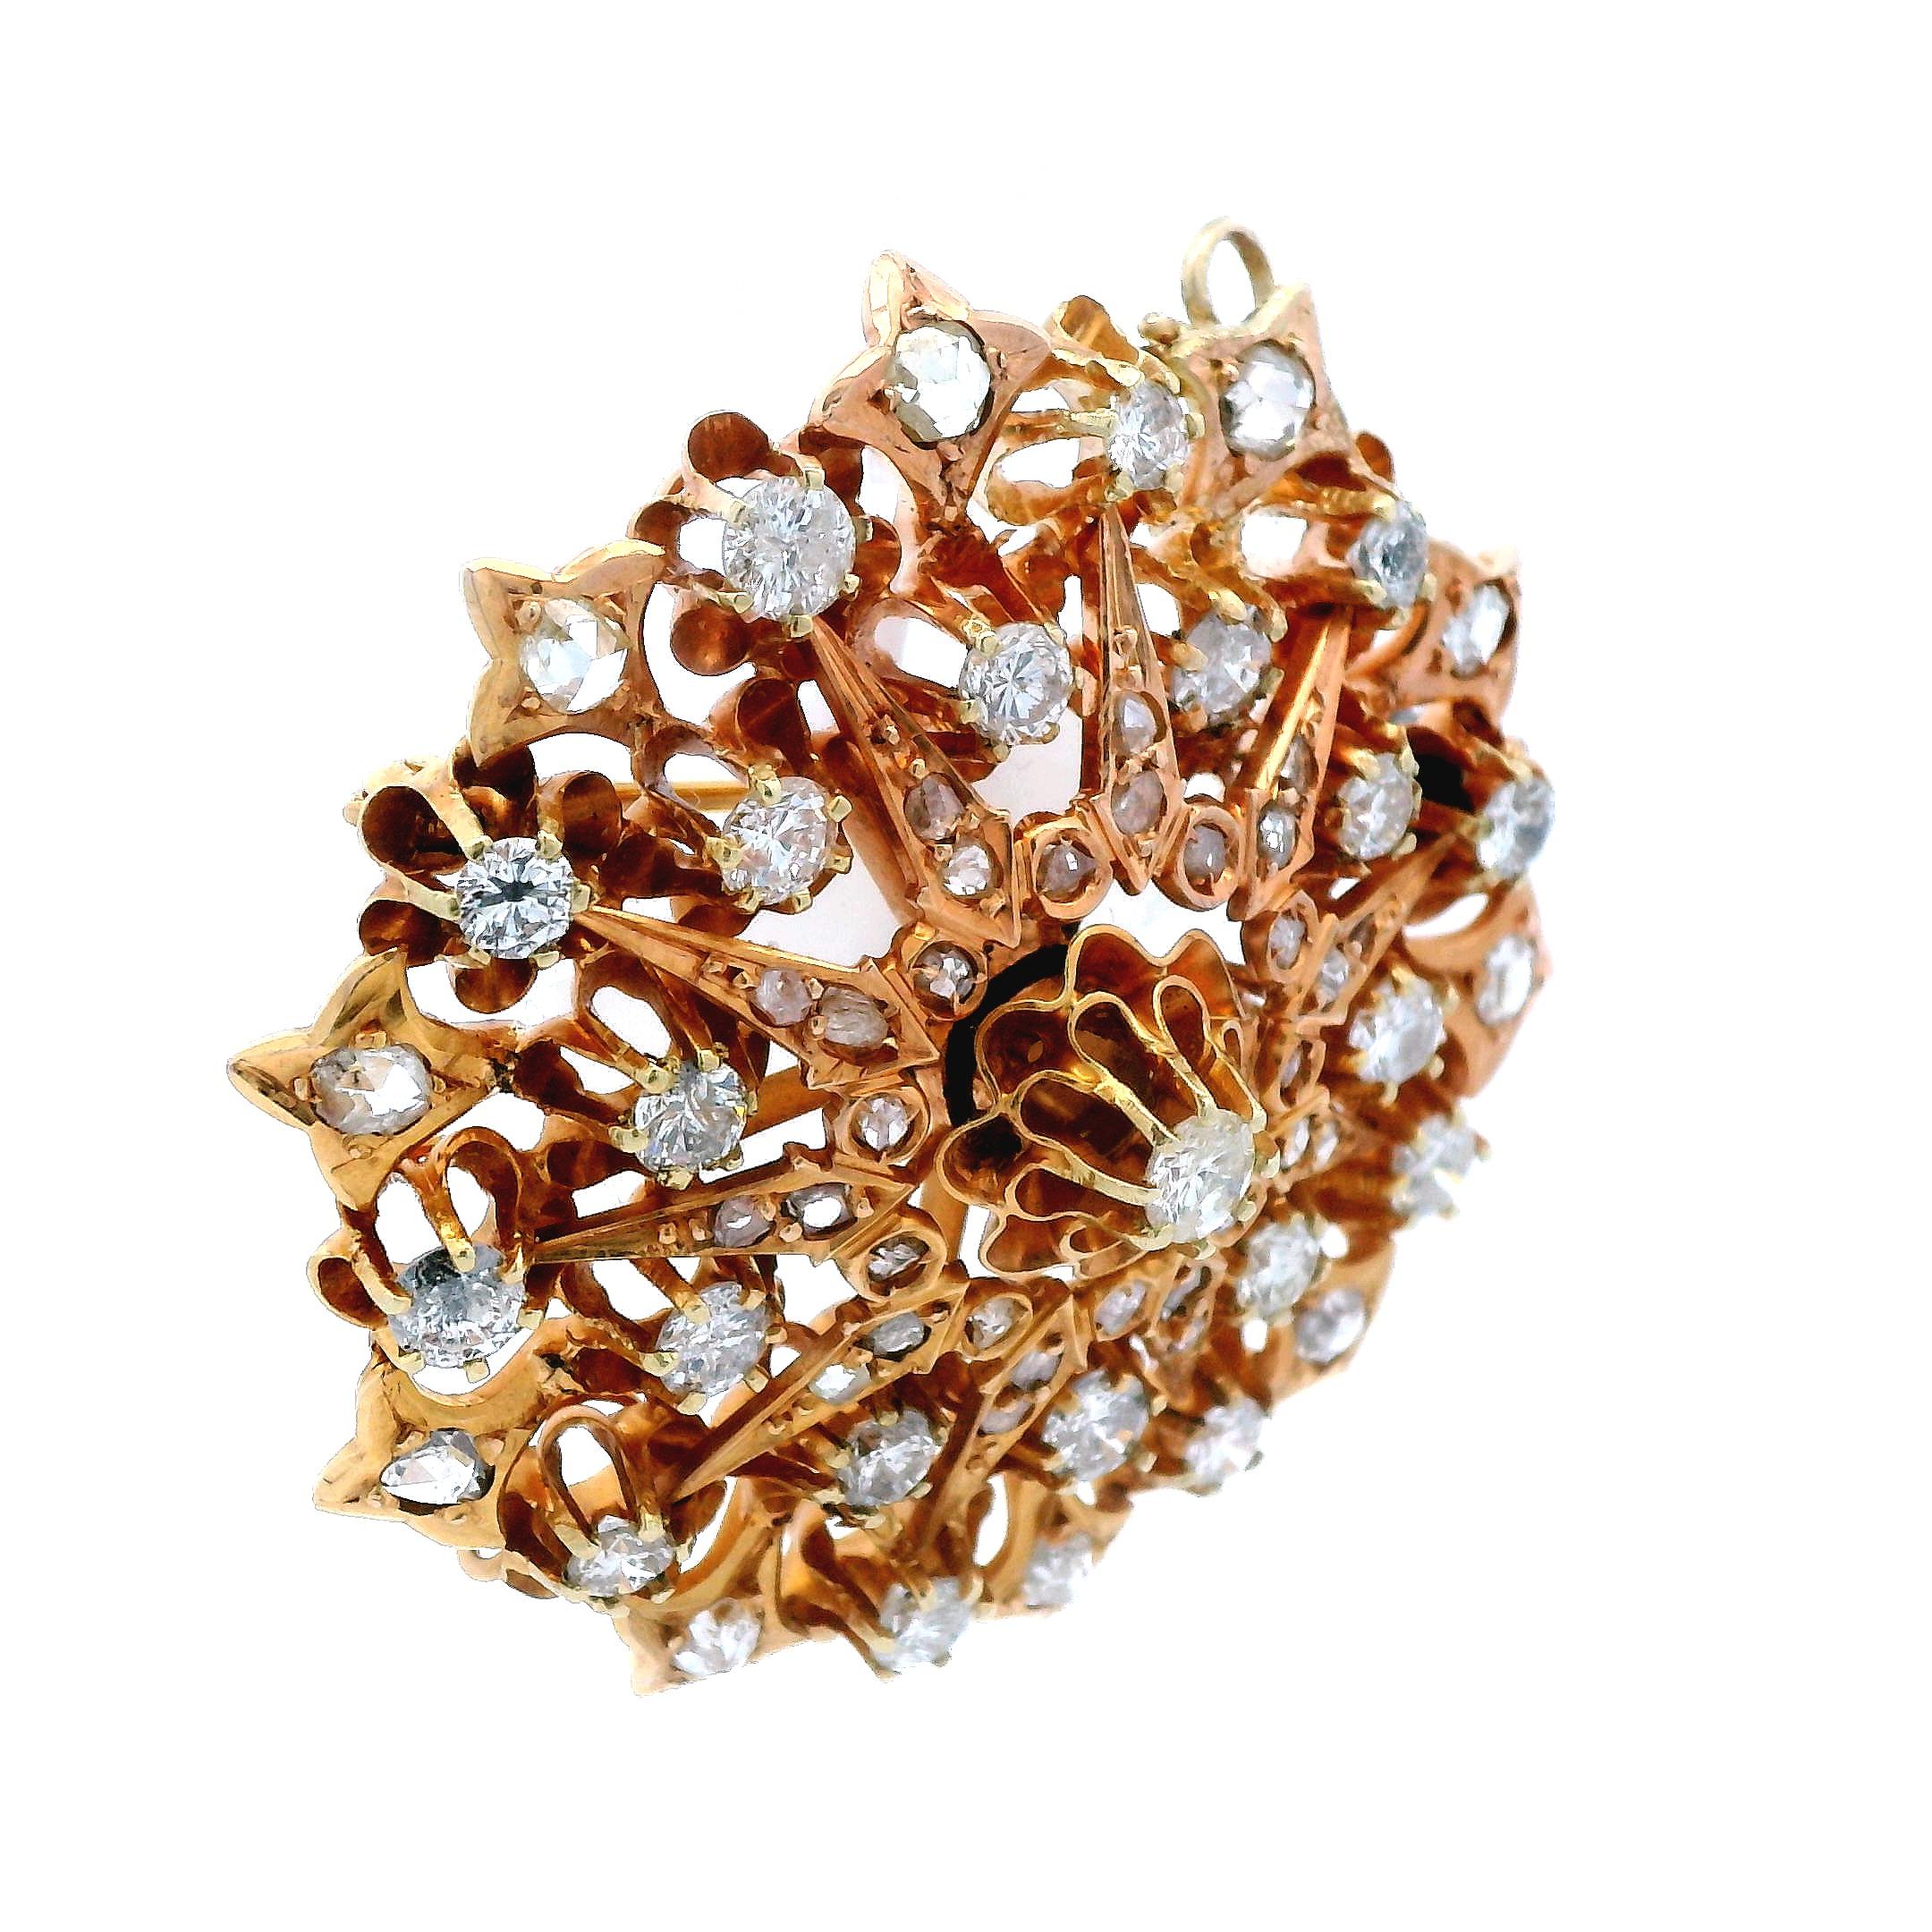 This stunning pin/pendant is made in 14k rose gold and features round and rose cut diamonds. This pin is unique due to its design and quality craftsmanship, but also for it’s ability to be worn as both a pin or a pendant. With over 5.5 carats of